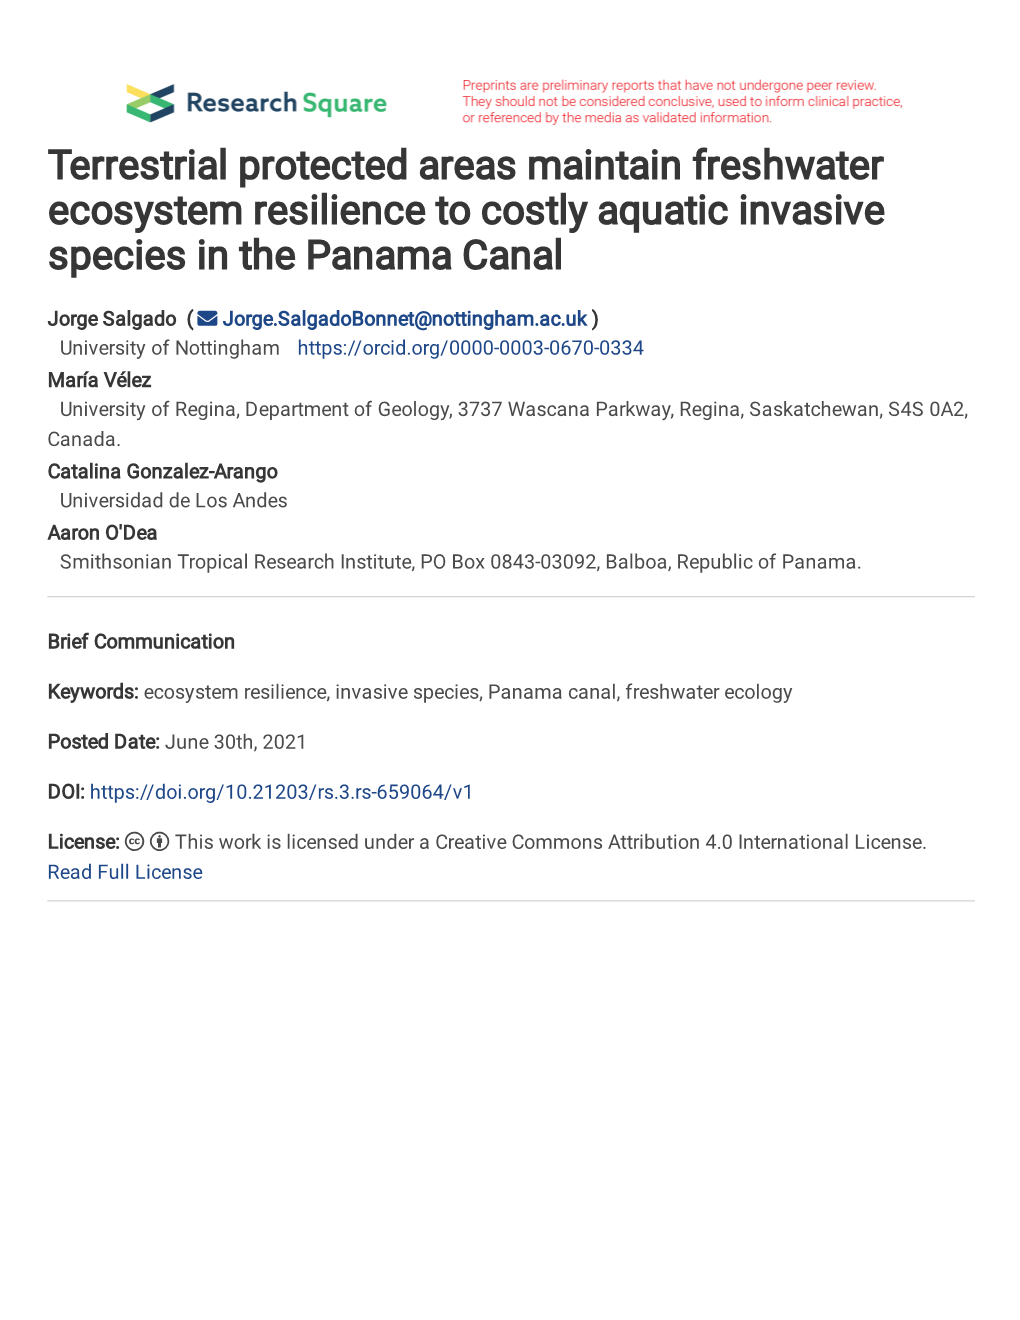 Terrestrial Protected Areas Maintain Freshwater Ecosystem Resilience to Costly Aquatic Invasive Species in the Panama Canal